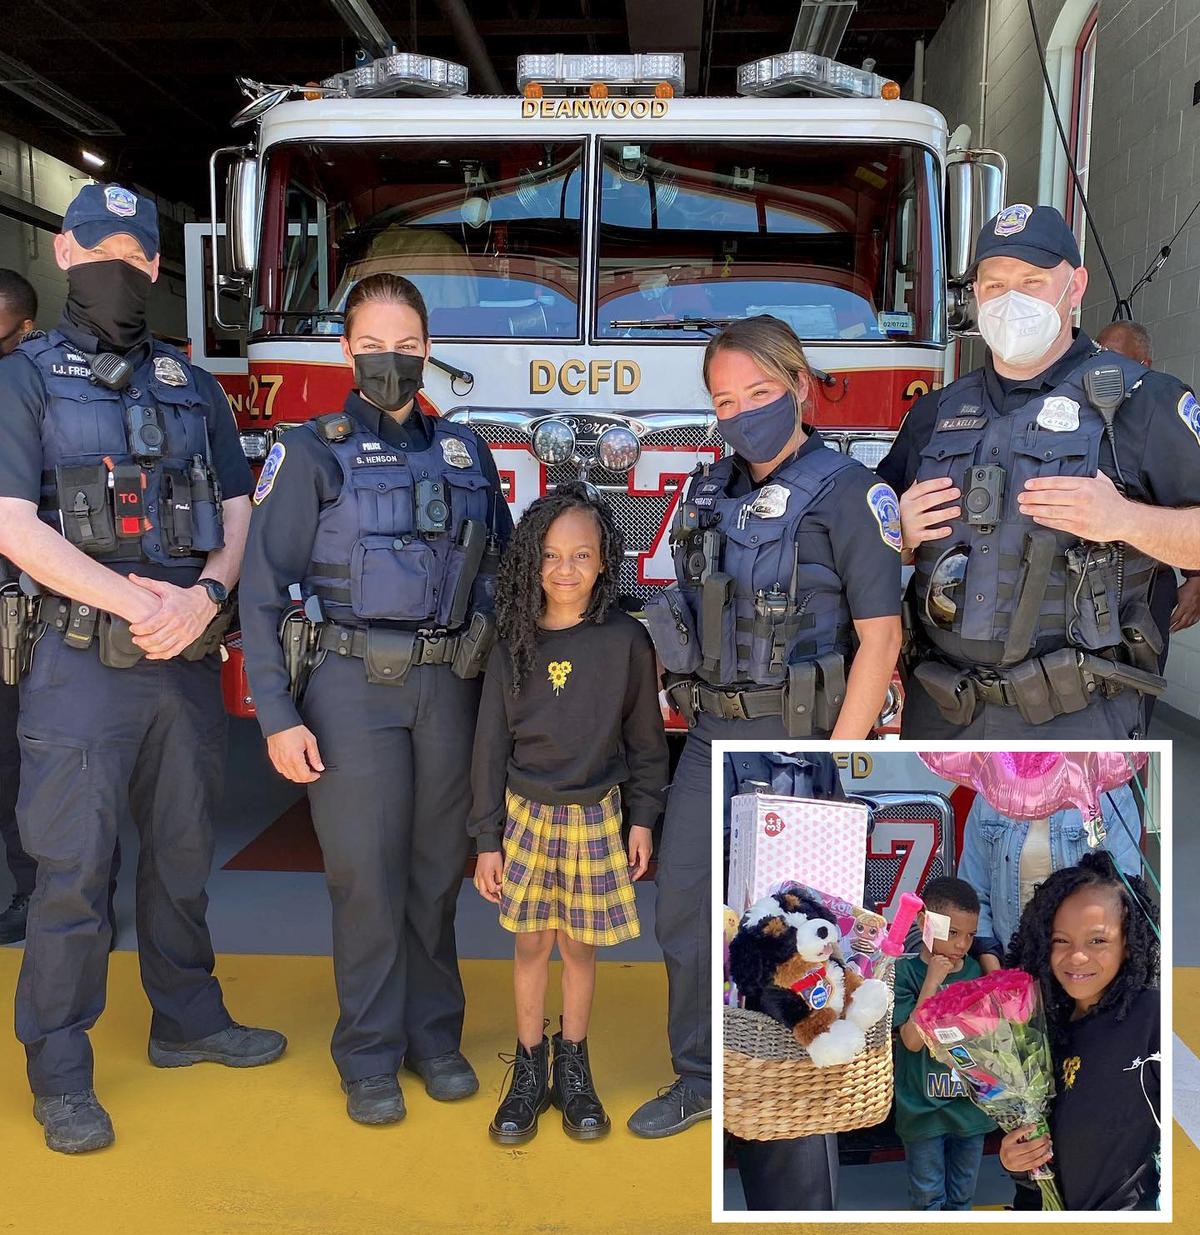 7-year-old Reagan Grimes reunites with first responders who saved her. (Courtesy of <a href="https://mpdc.dc.gov/">DC Metropolitan Police Dept.</a>)